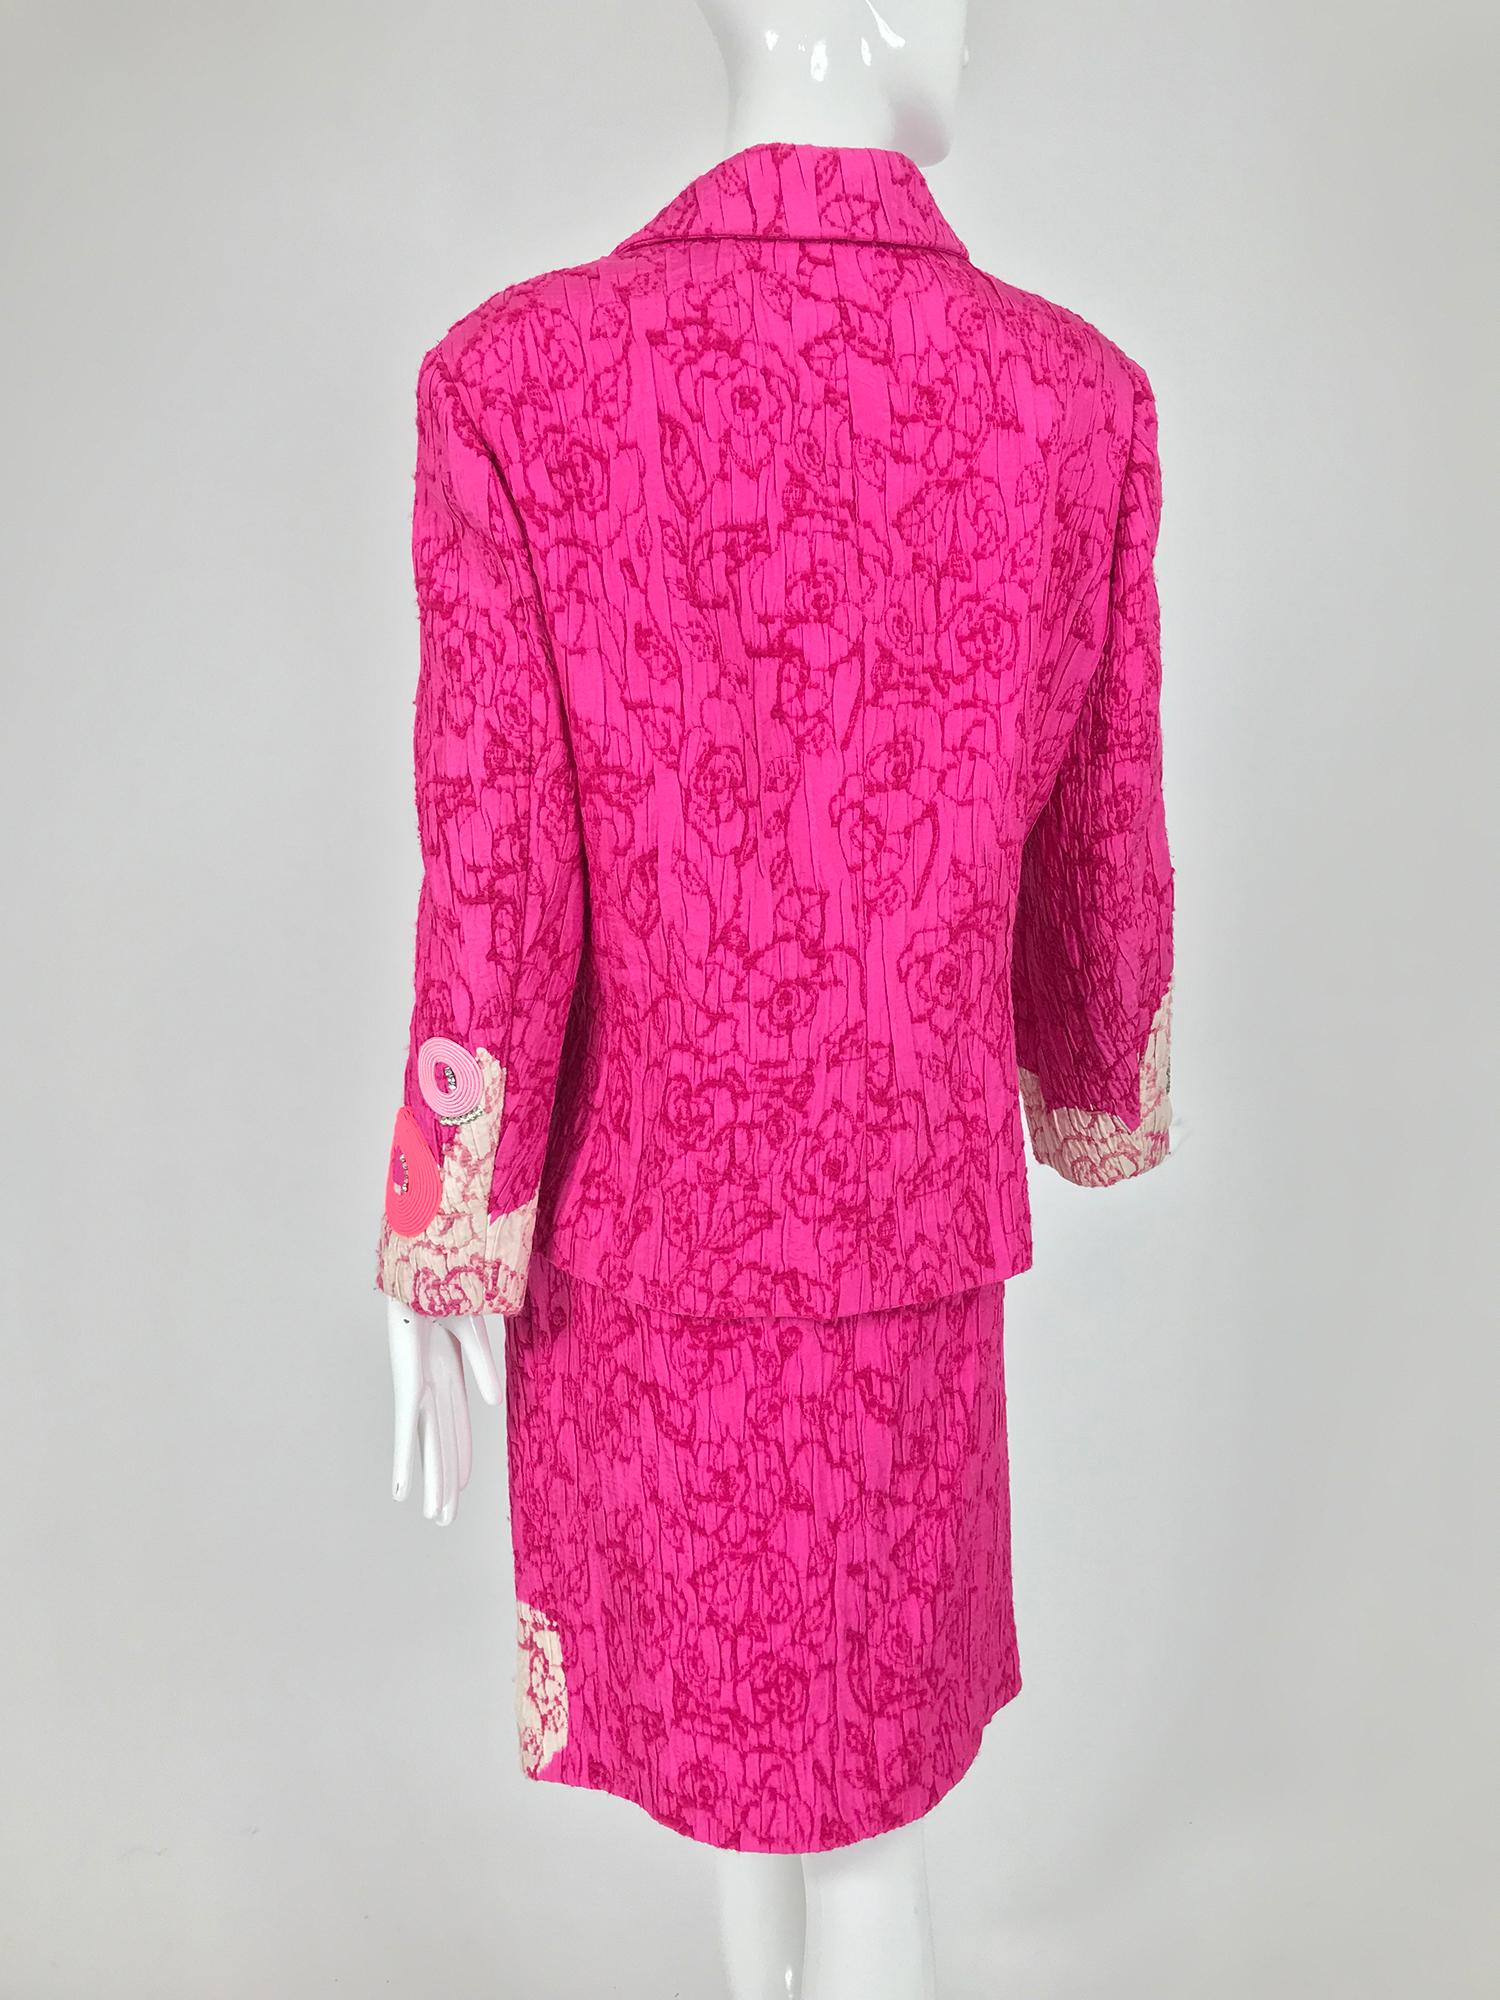 Christian Lacroix Pink Embroidered Silk Applique Skirt Suit 1990s For Sale 5